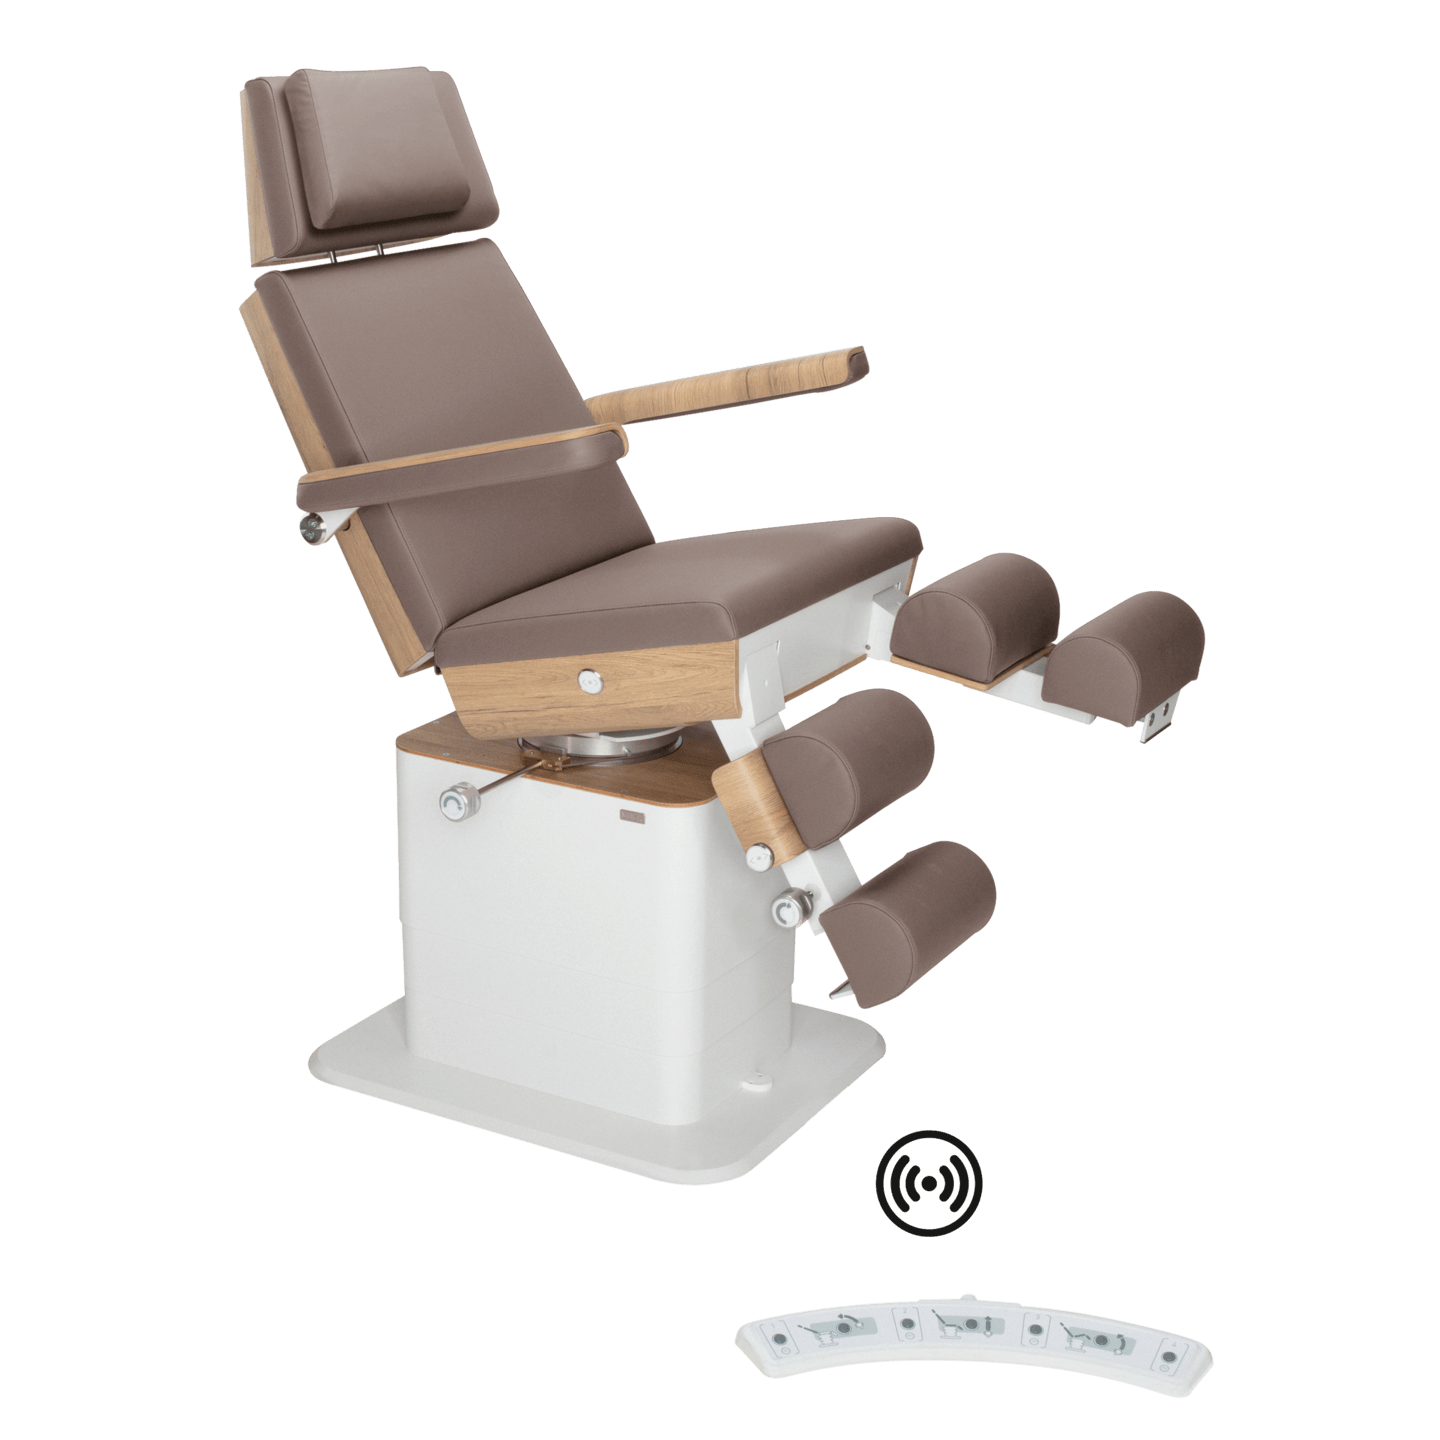 RUCK - MOON Podiatry Chair/Couch with motorised leg sections and patient control in nutmeg